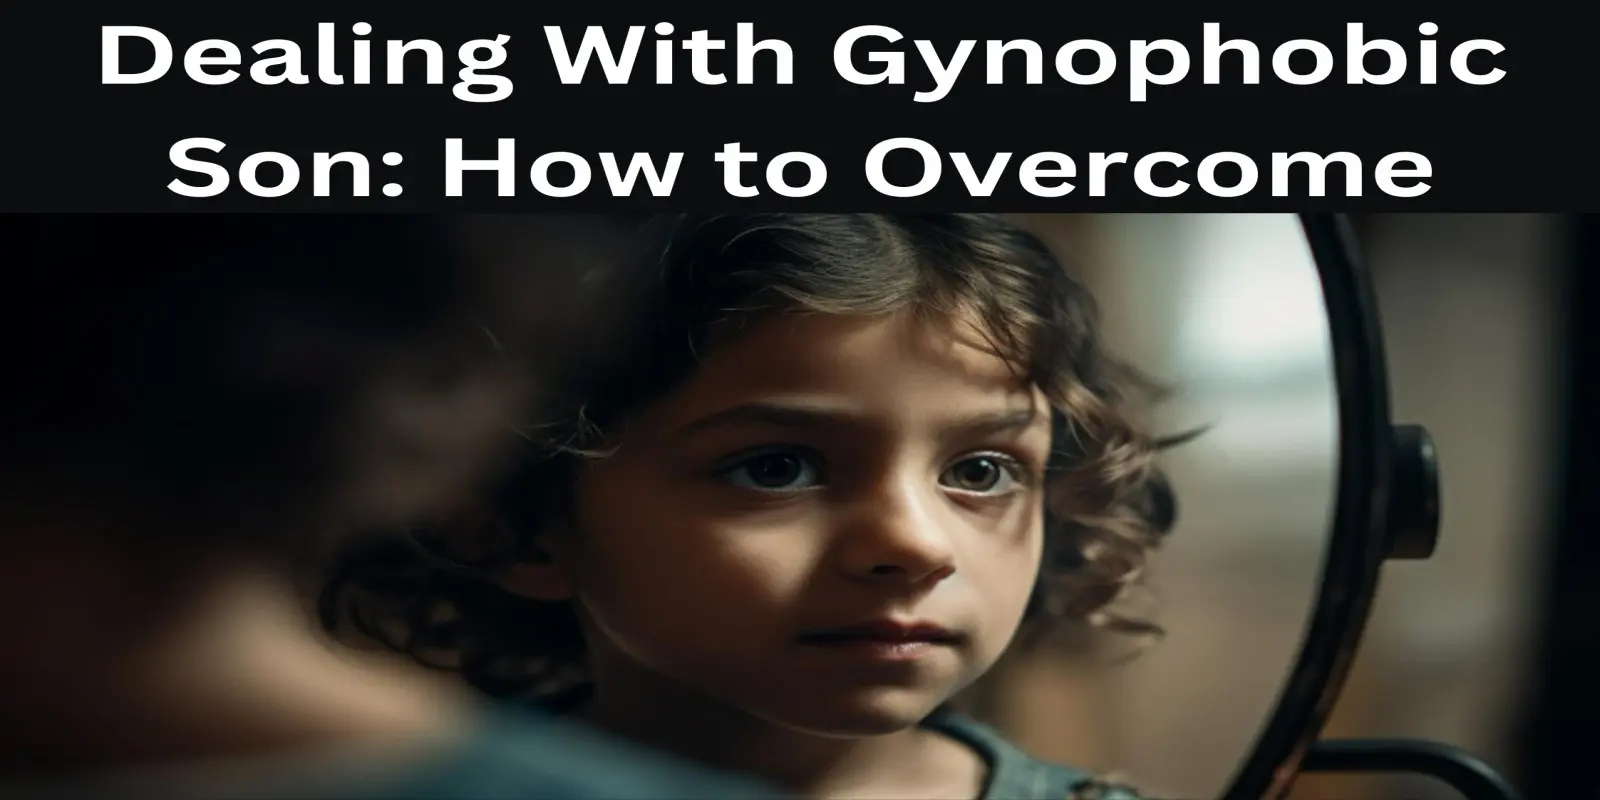 Dealing With Gynophobic Son: How to Overcome